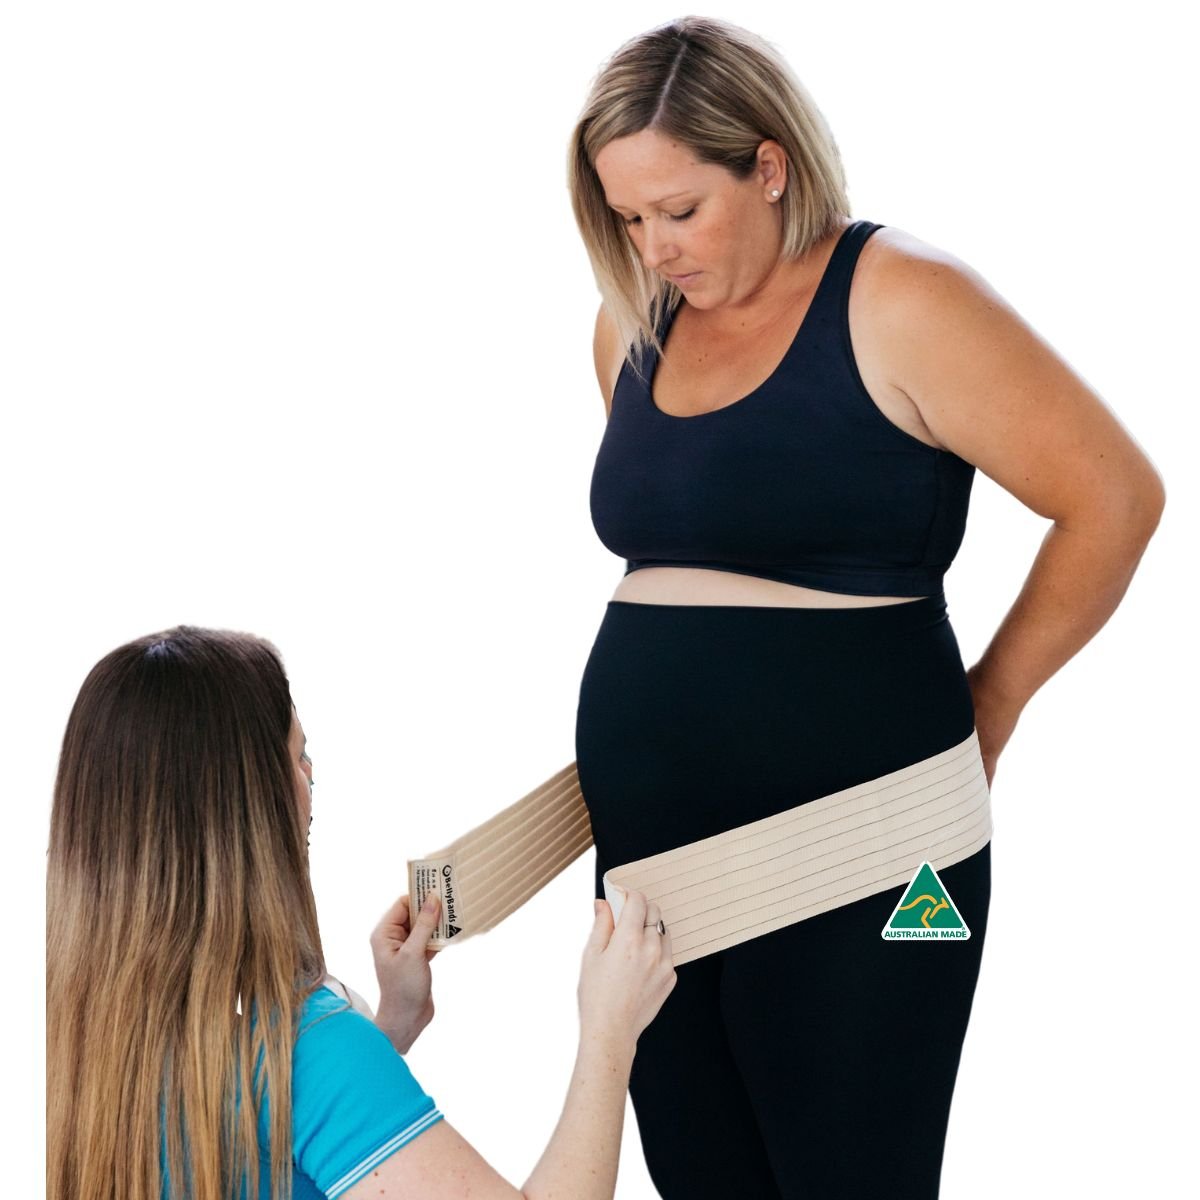 Maternity - Pregnancy, Postpartum & C-section – Belly Bands